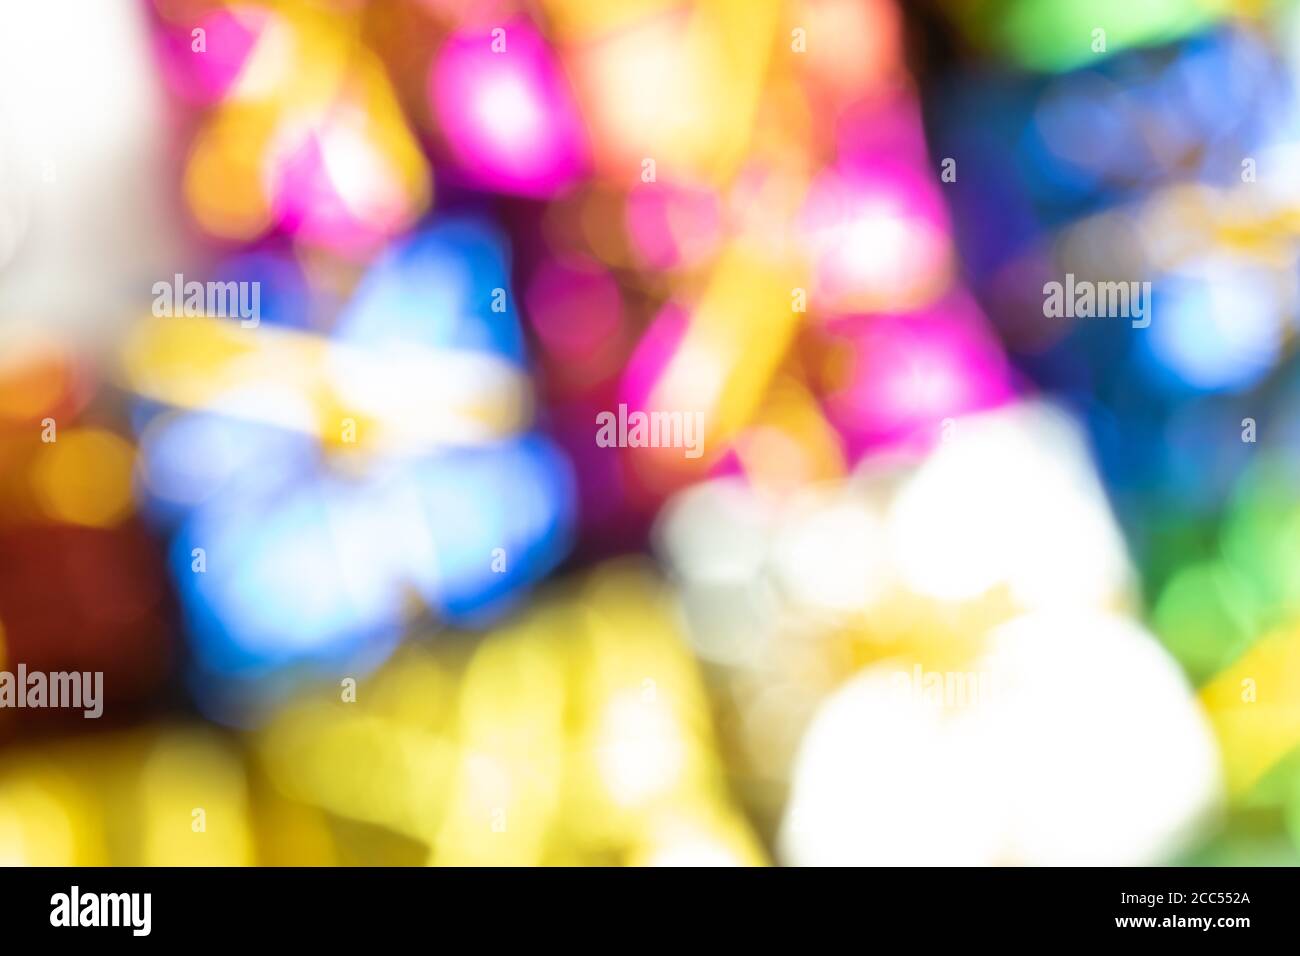 Blurry bright background with present boxes Stock Photo